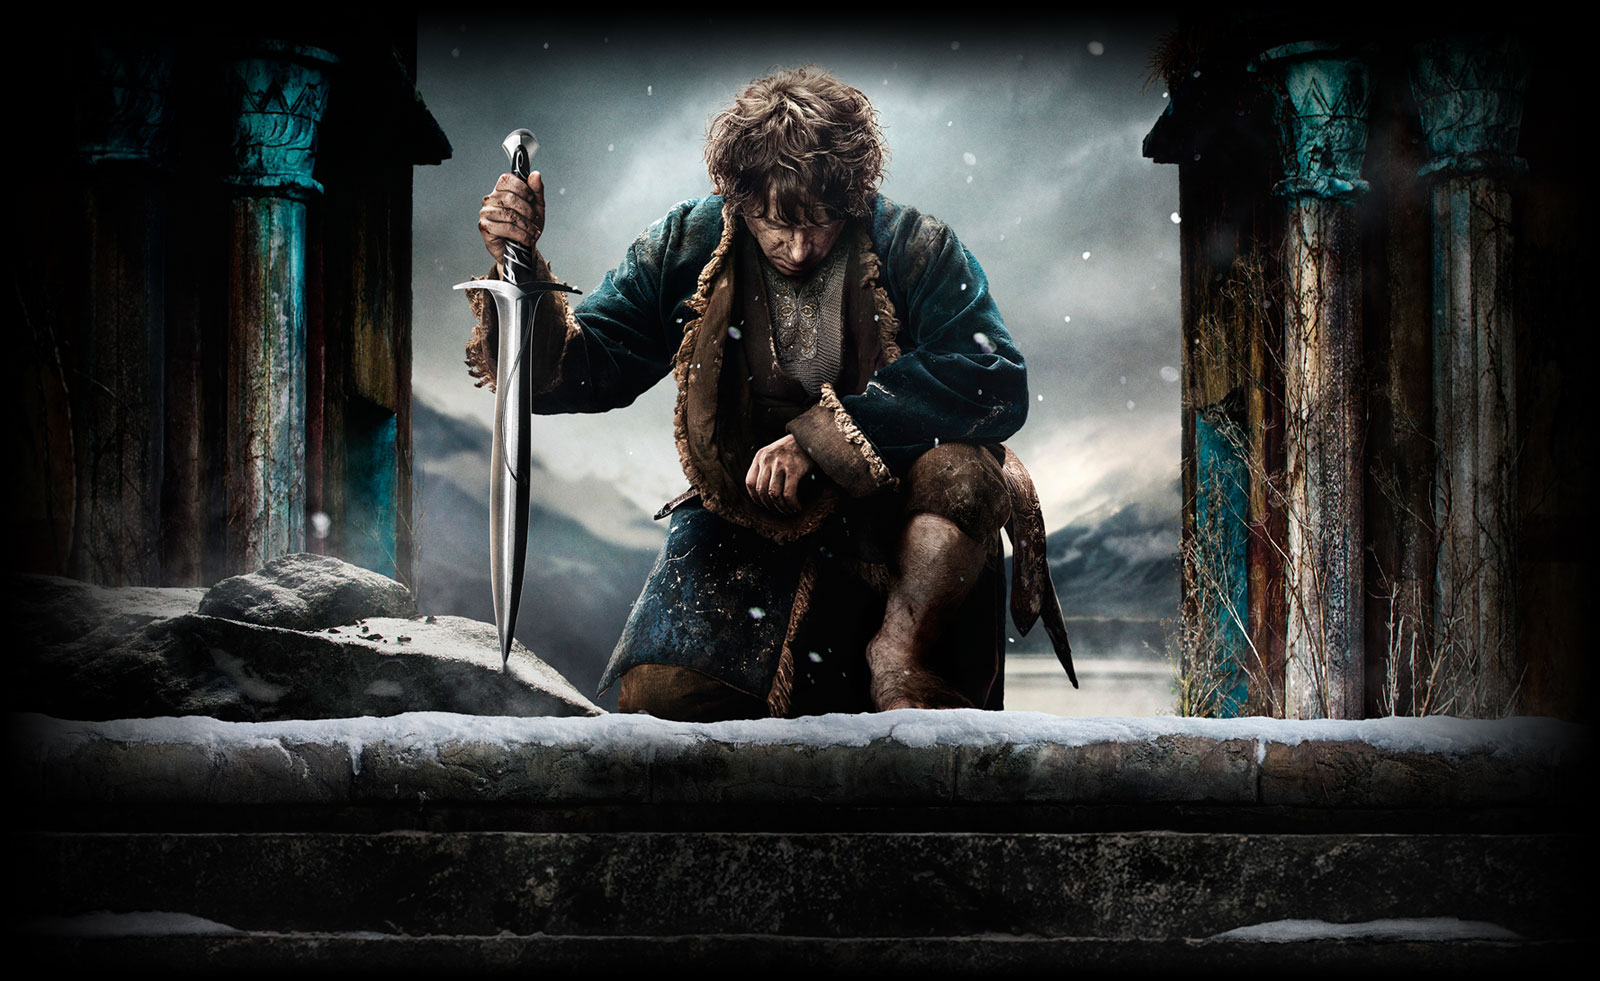 Battle of the Five Armies is hollow, yet entertaining